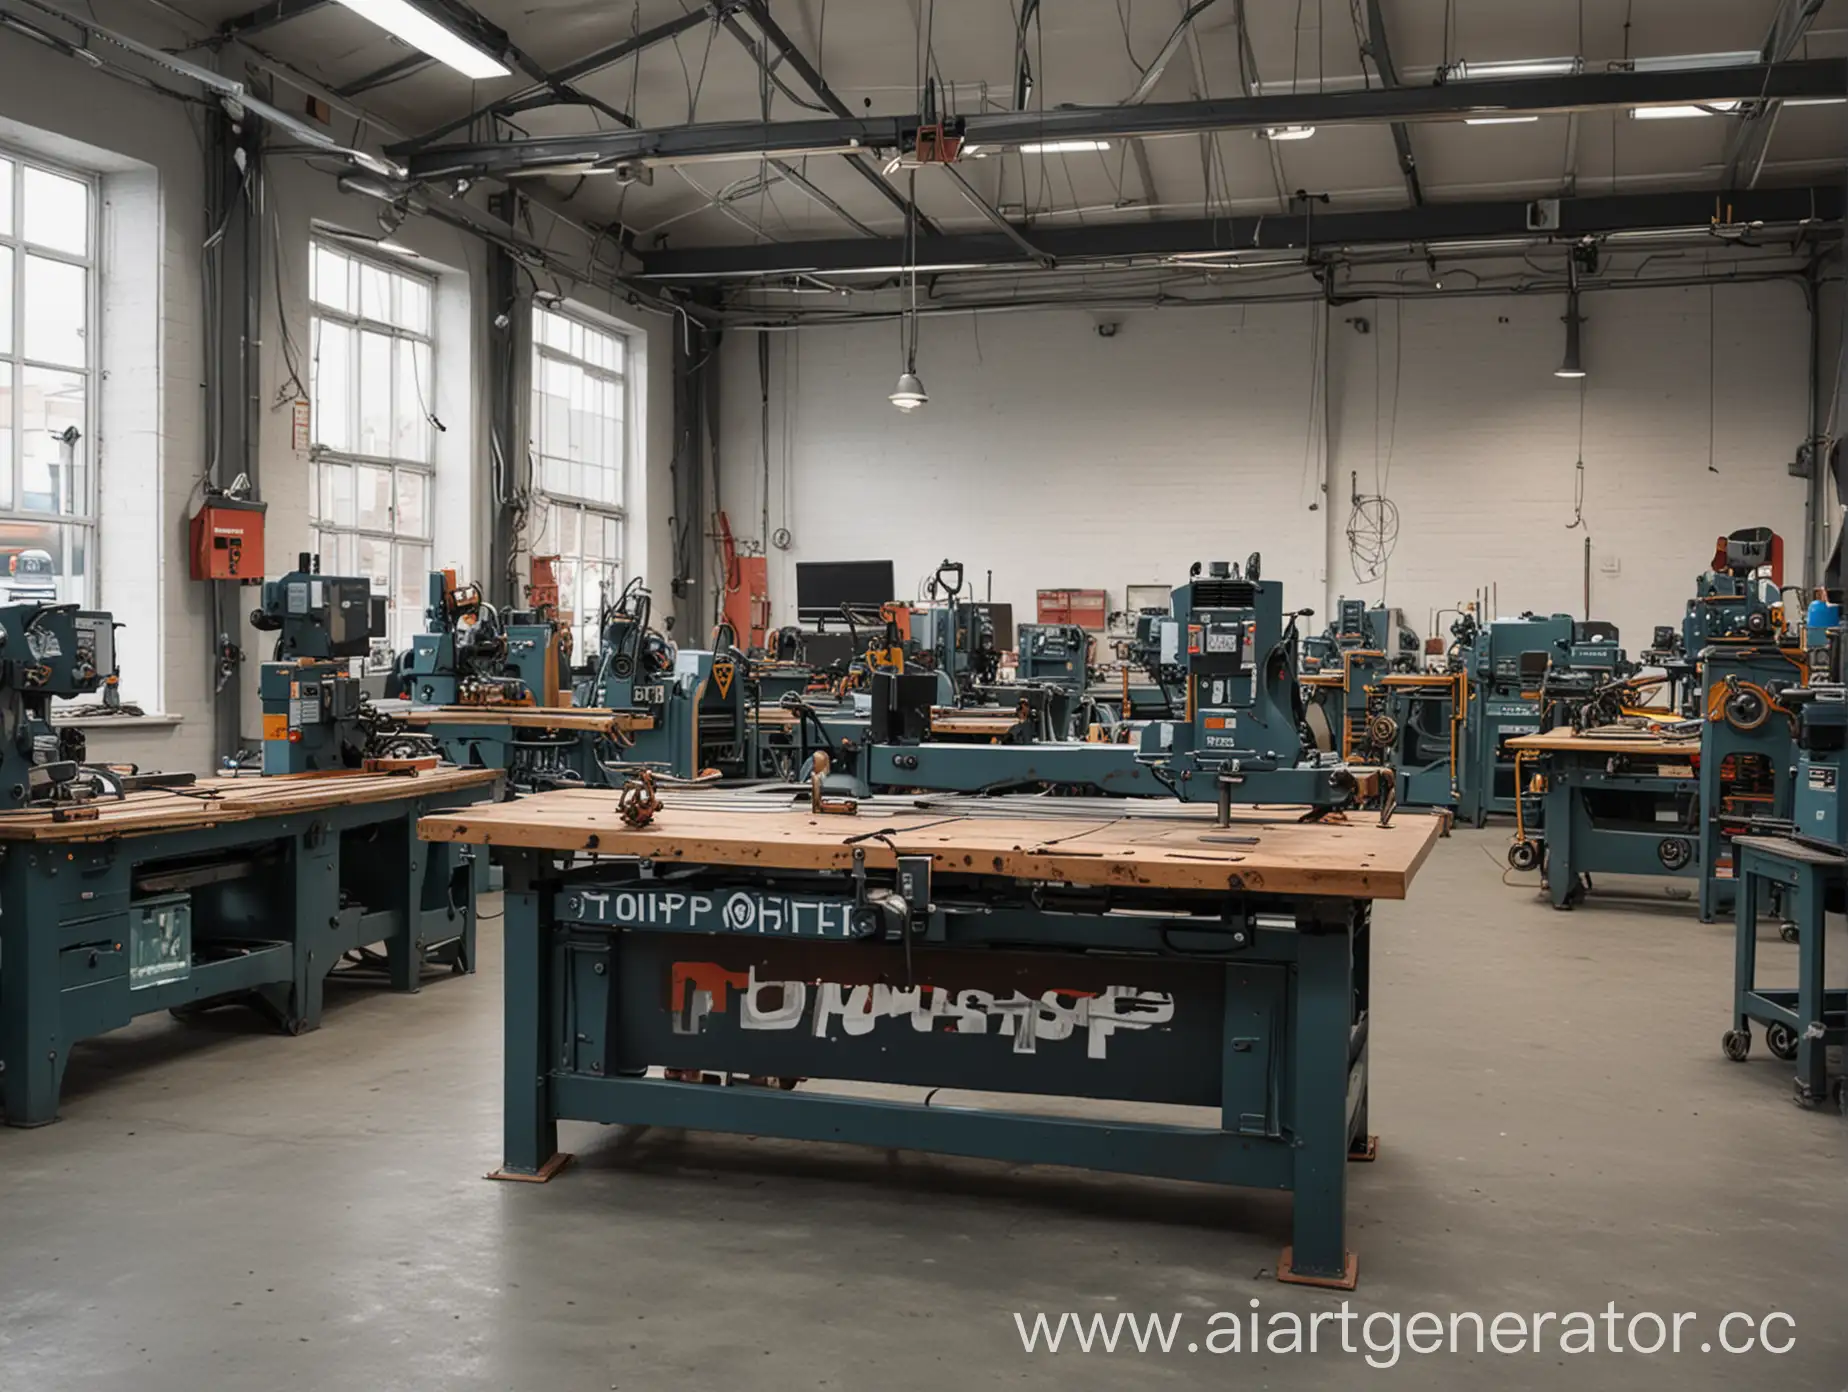 Industrial-Metalworking-Machines-at-TOPSHOP-HighQuality-Equipment-for-Your-Workshop